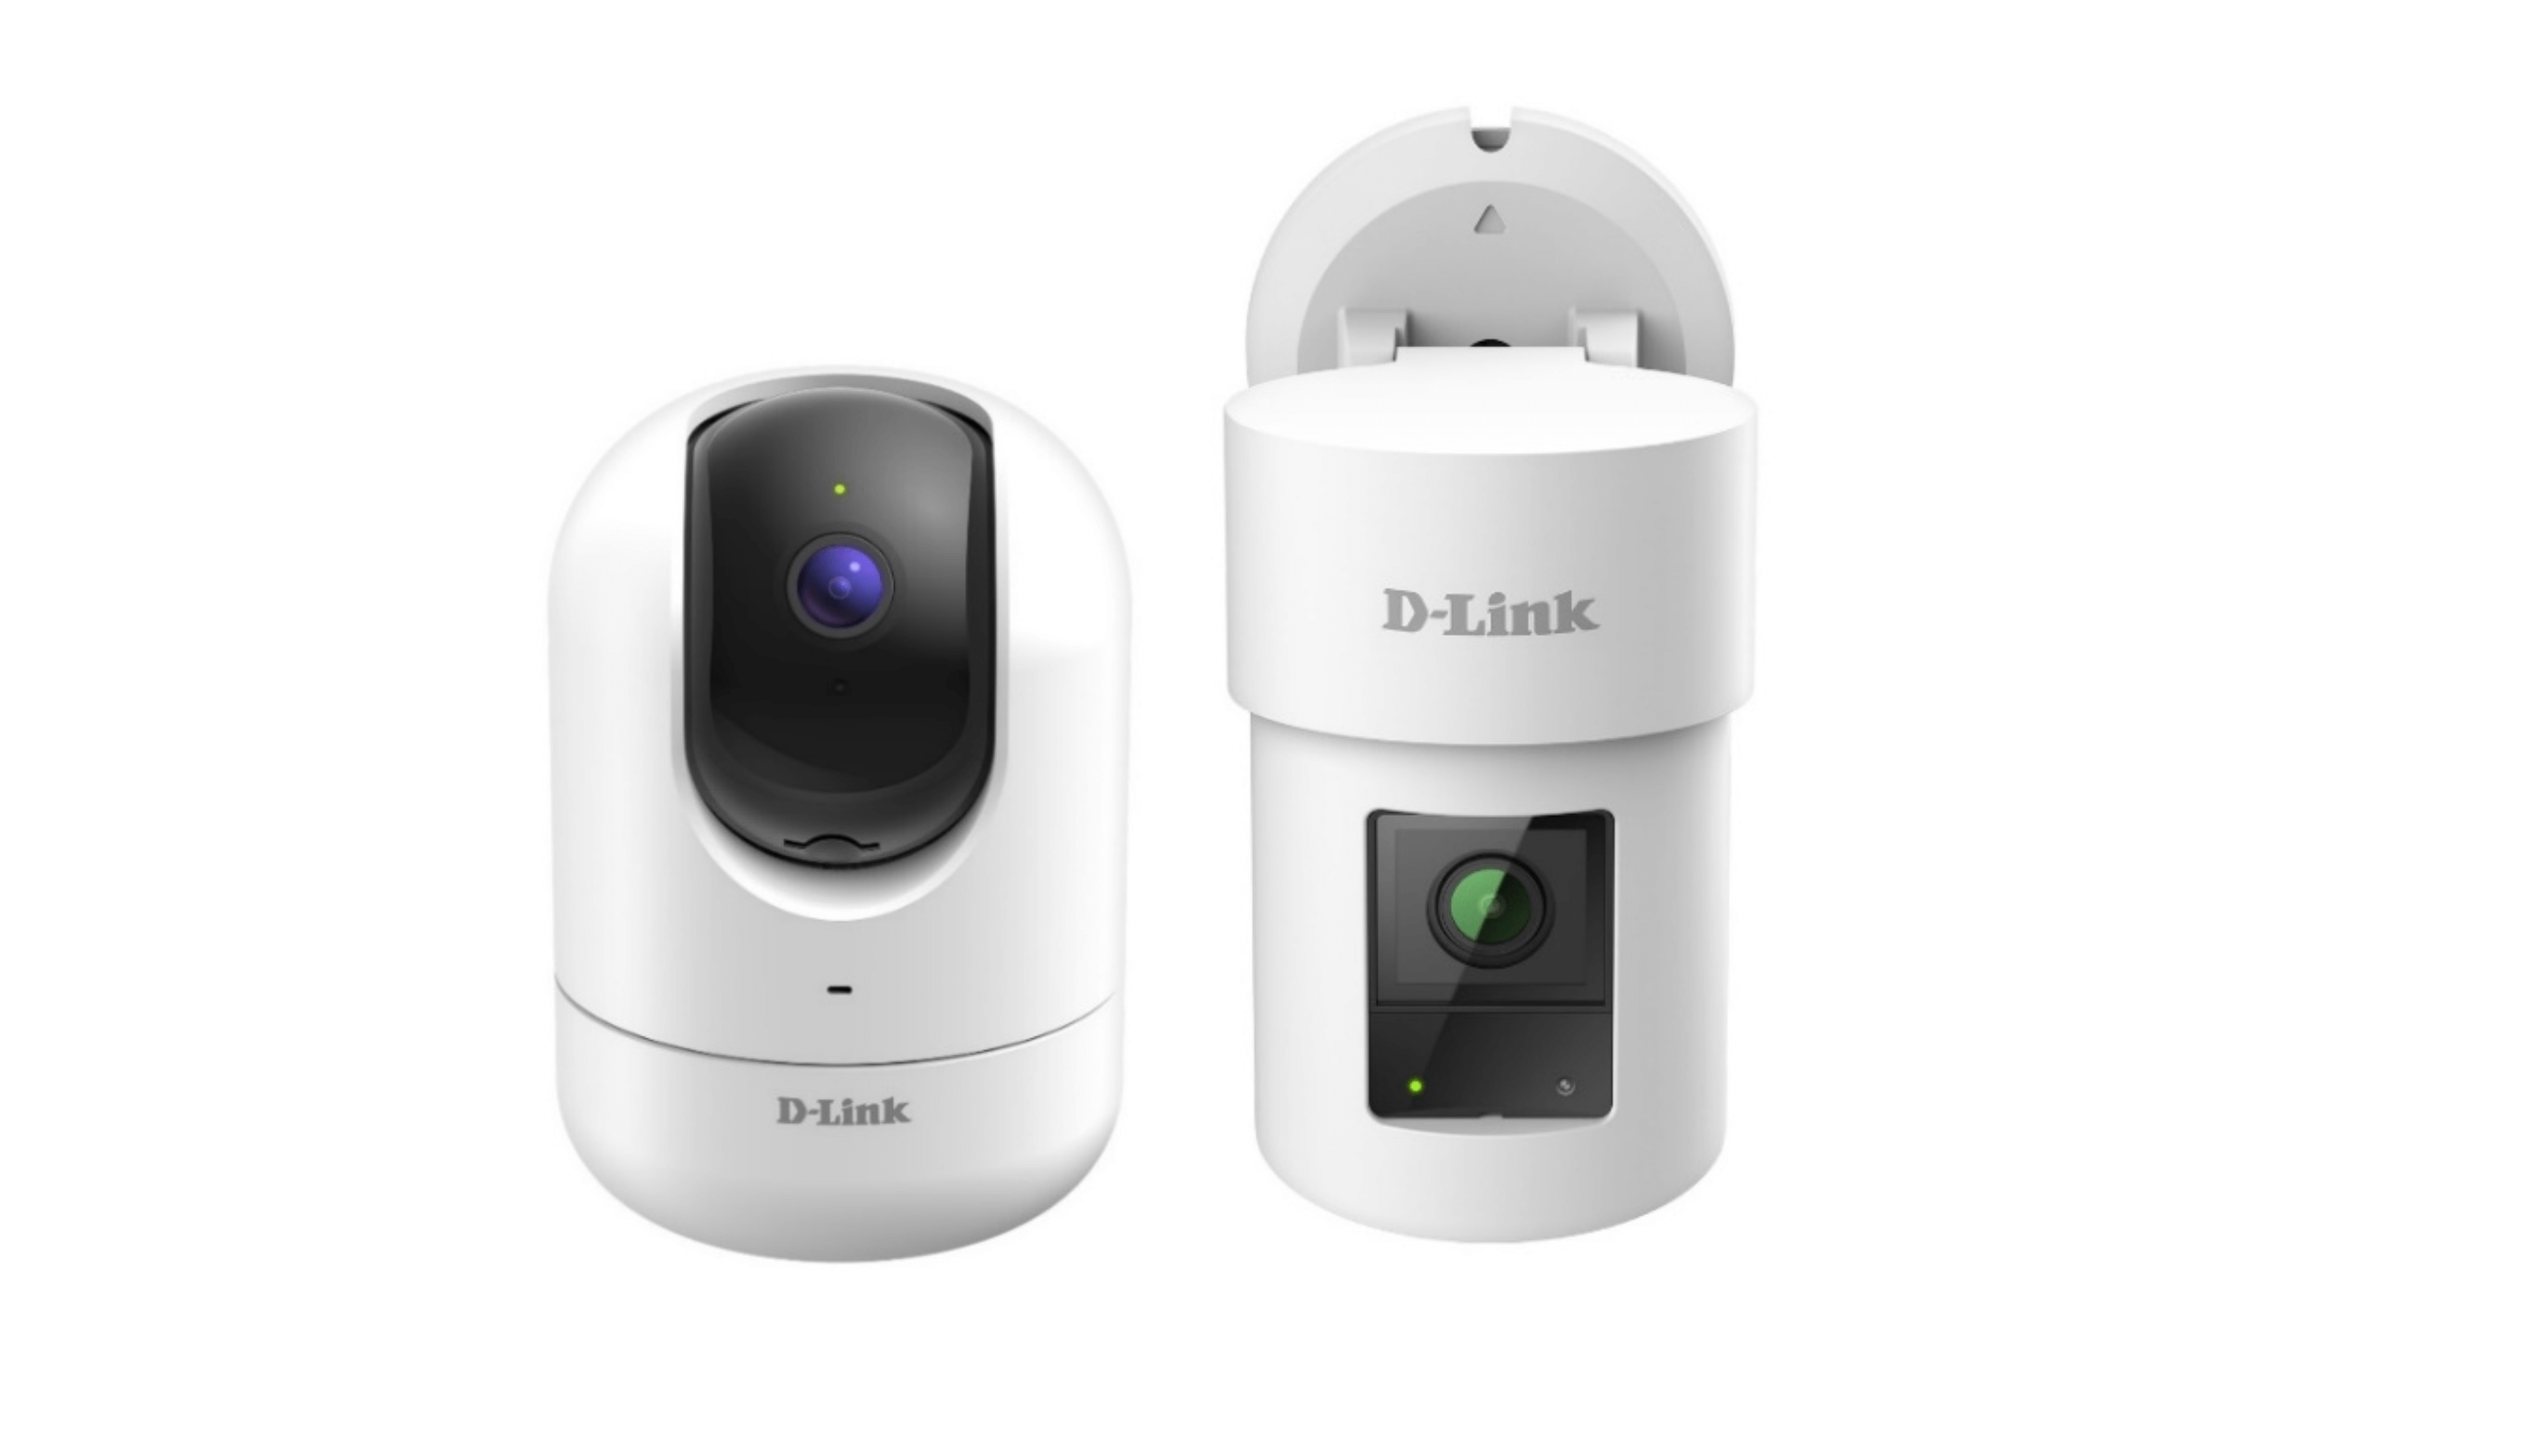 D-Link wins prestigious Red Dot Awards for outstanding product design